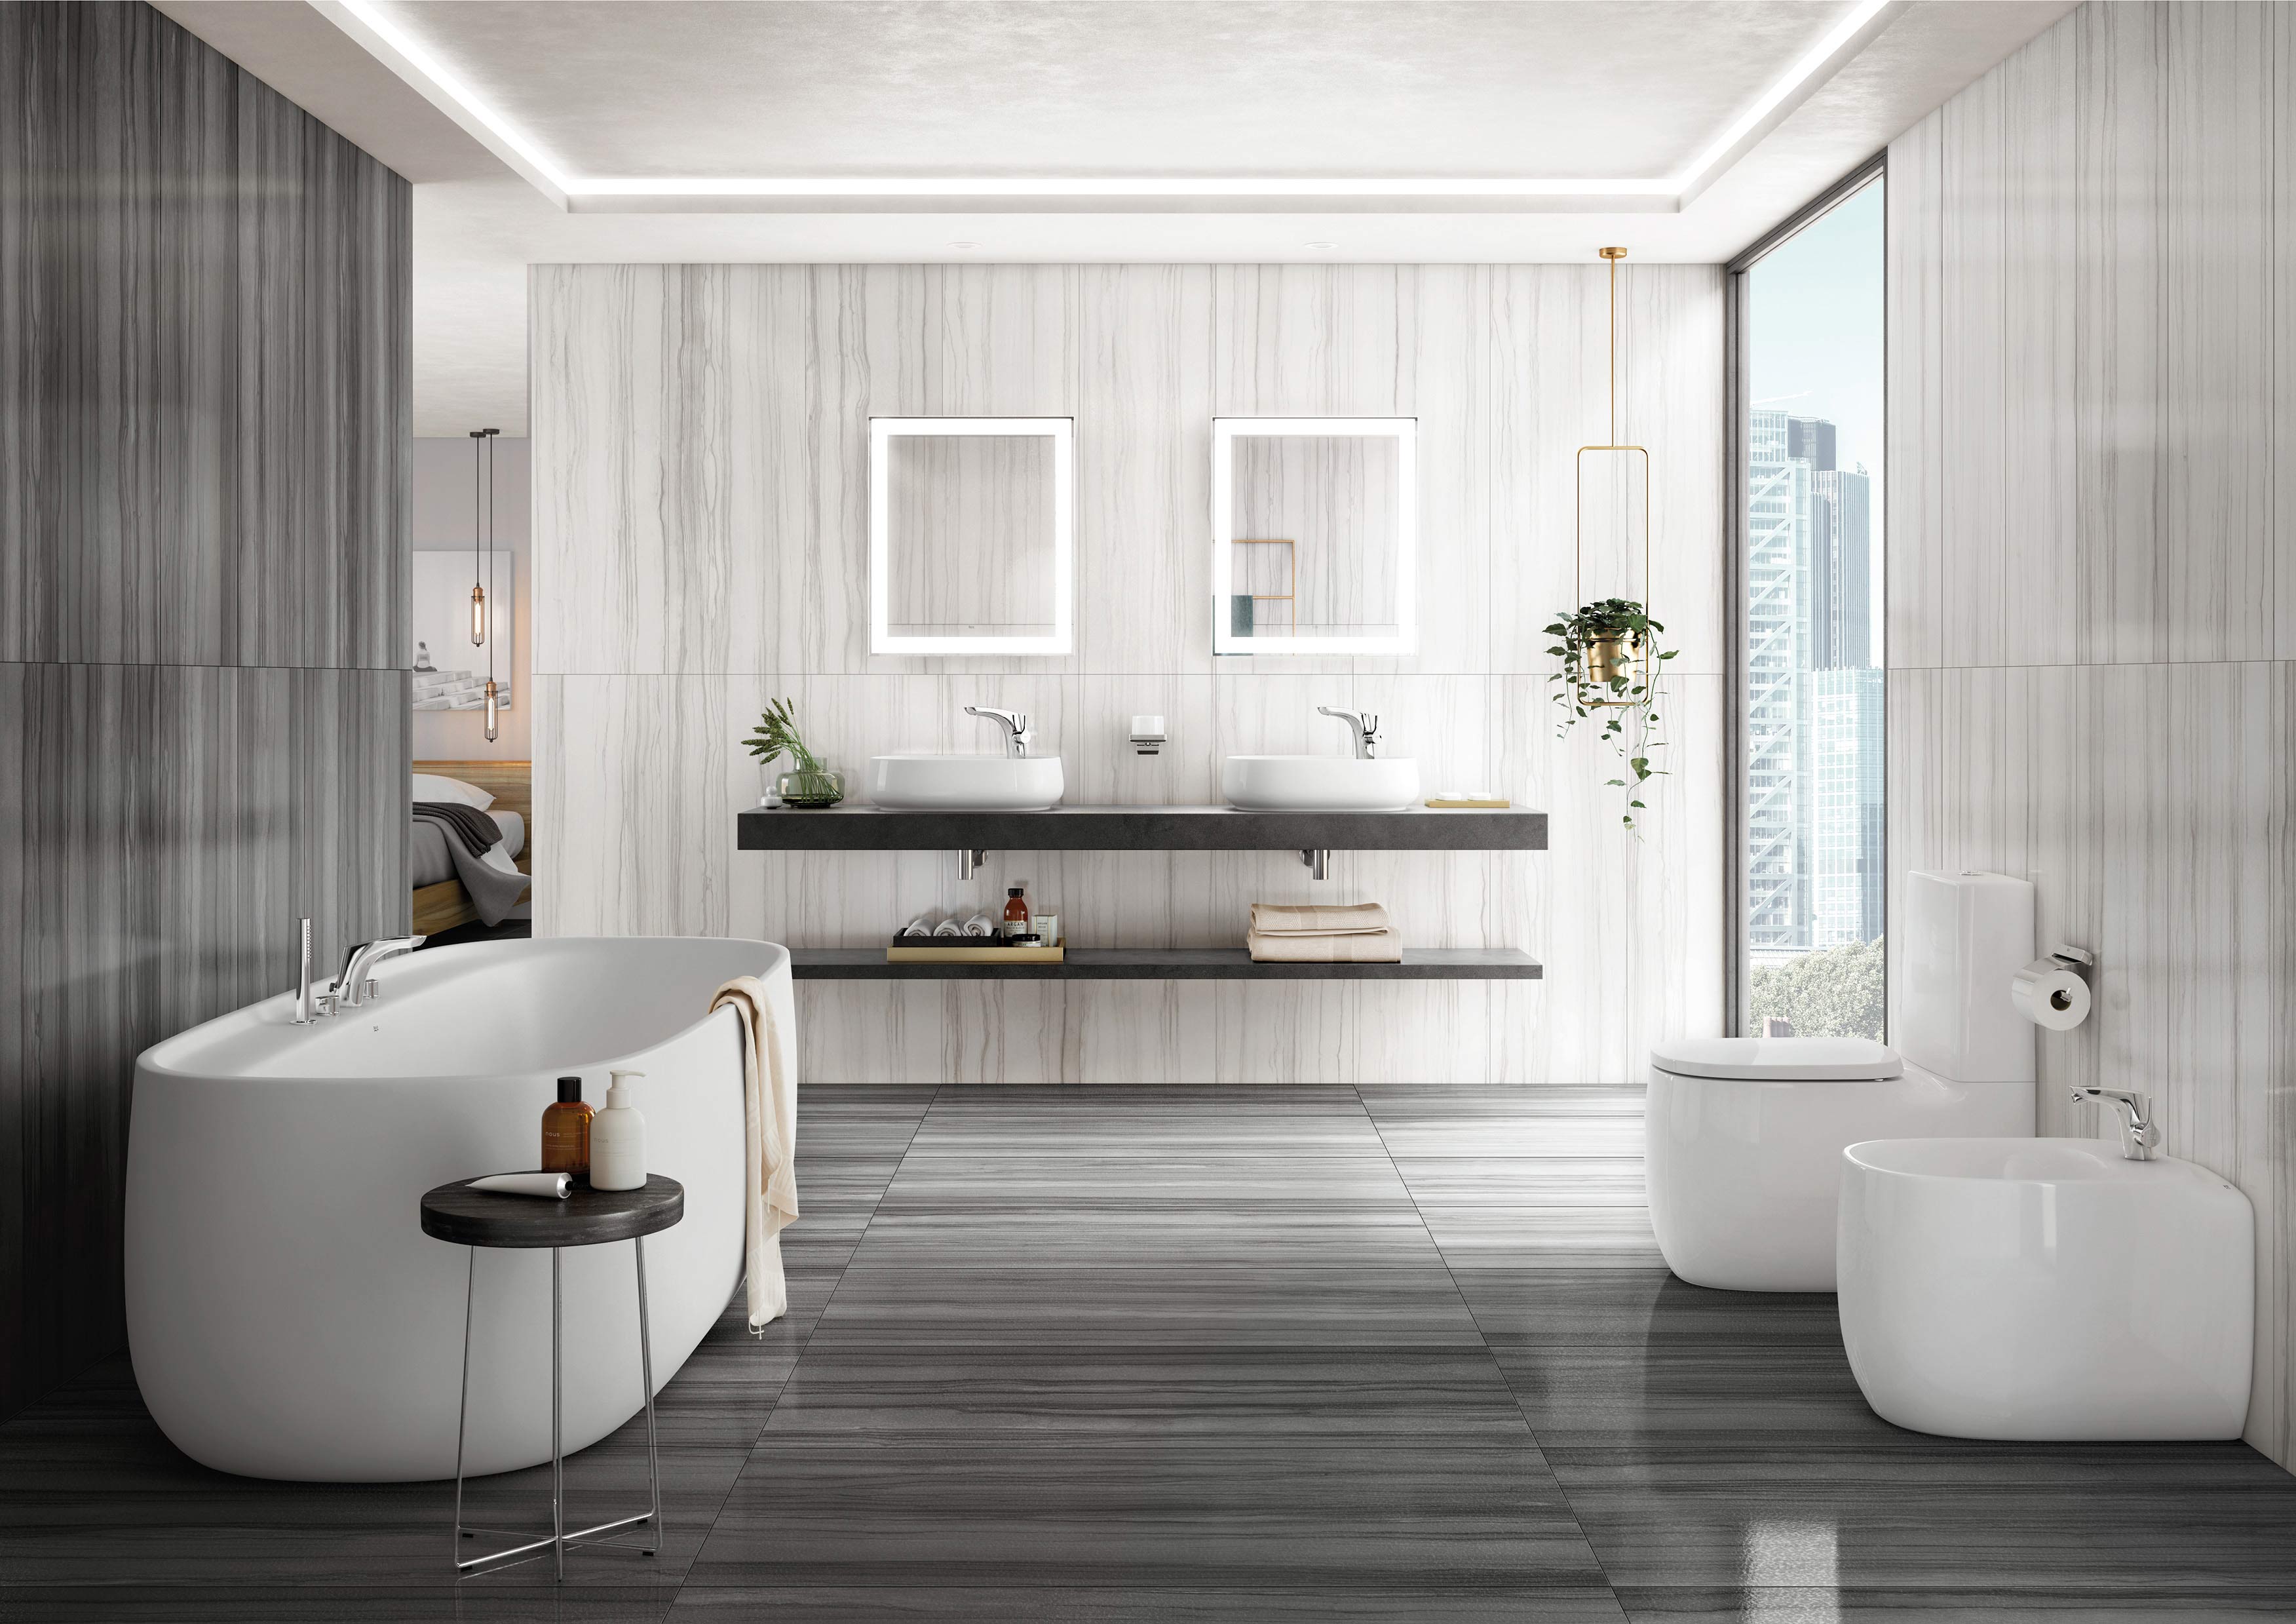 Step up your style with our bathroom design tips | Roca Life